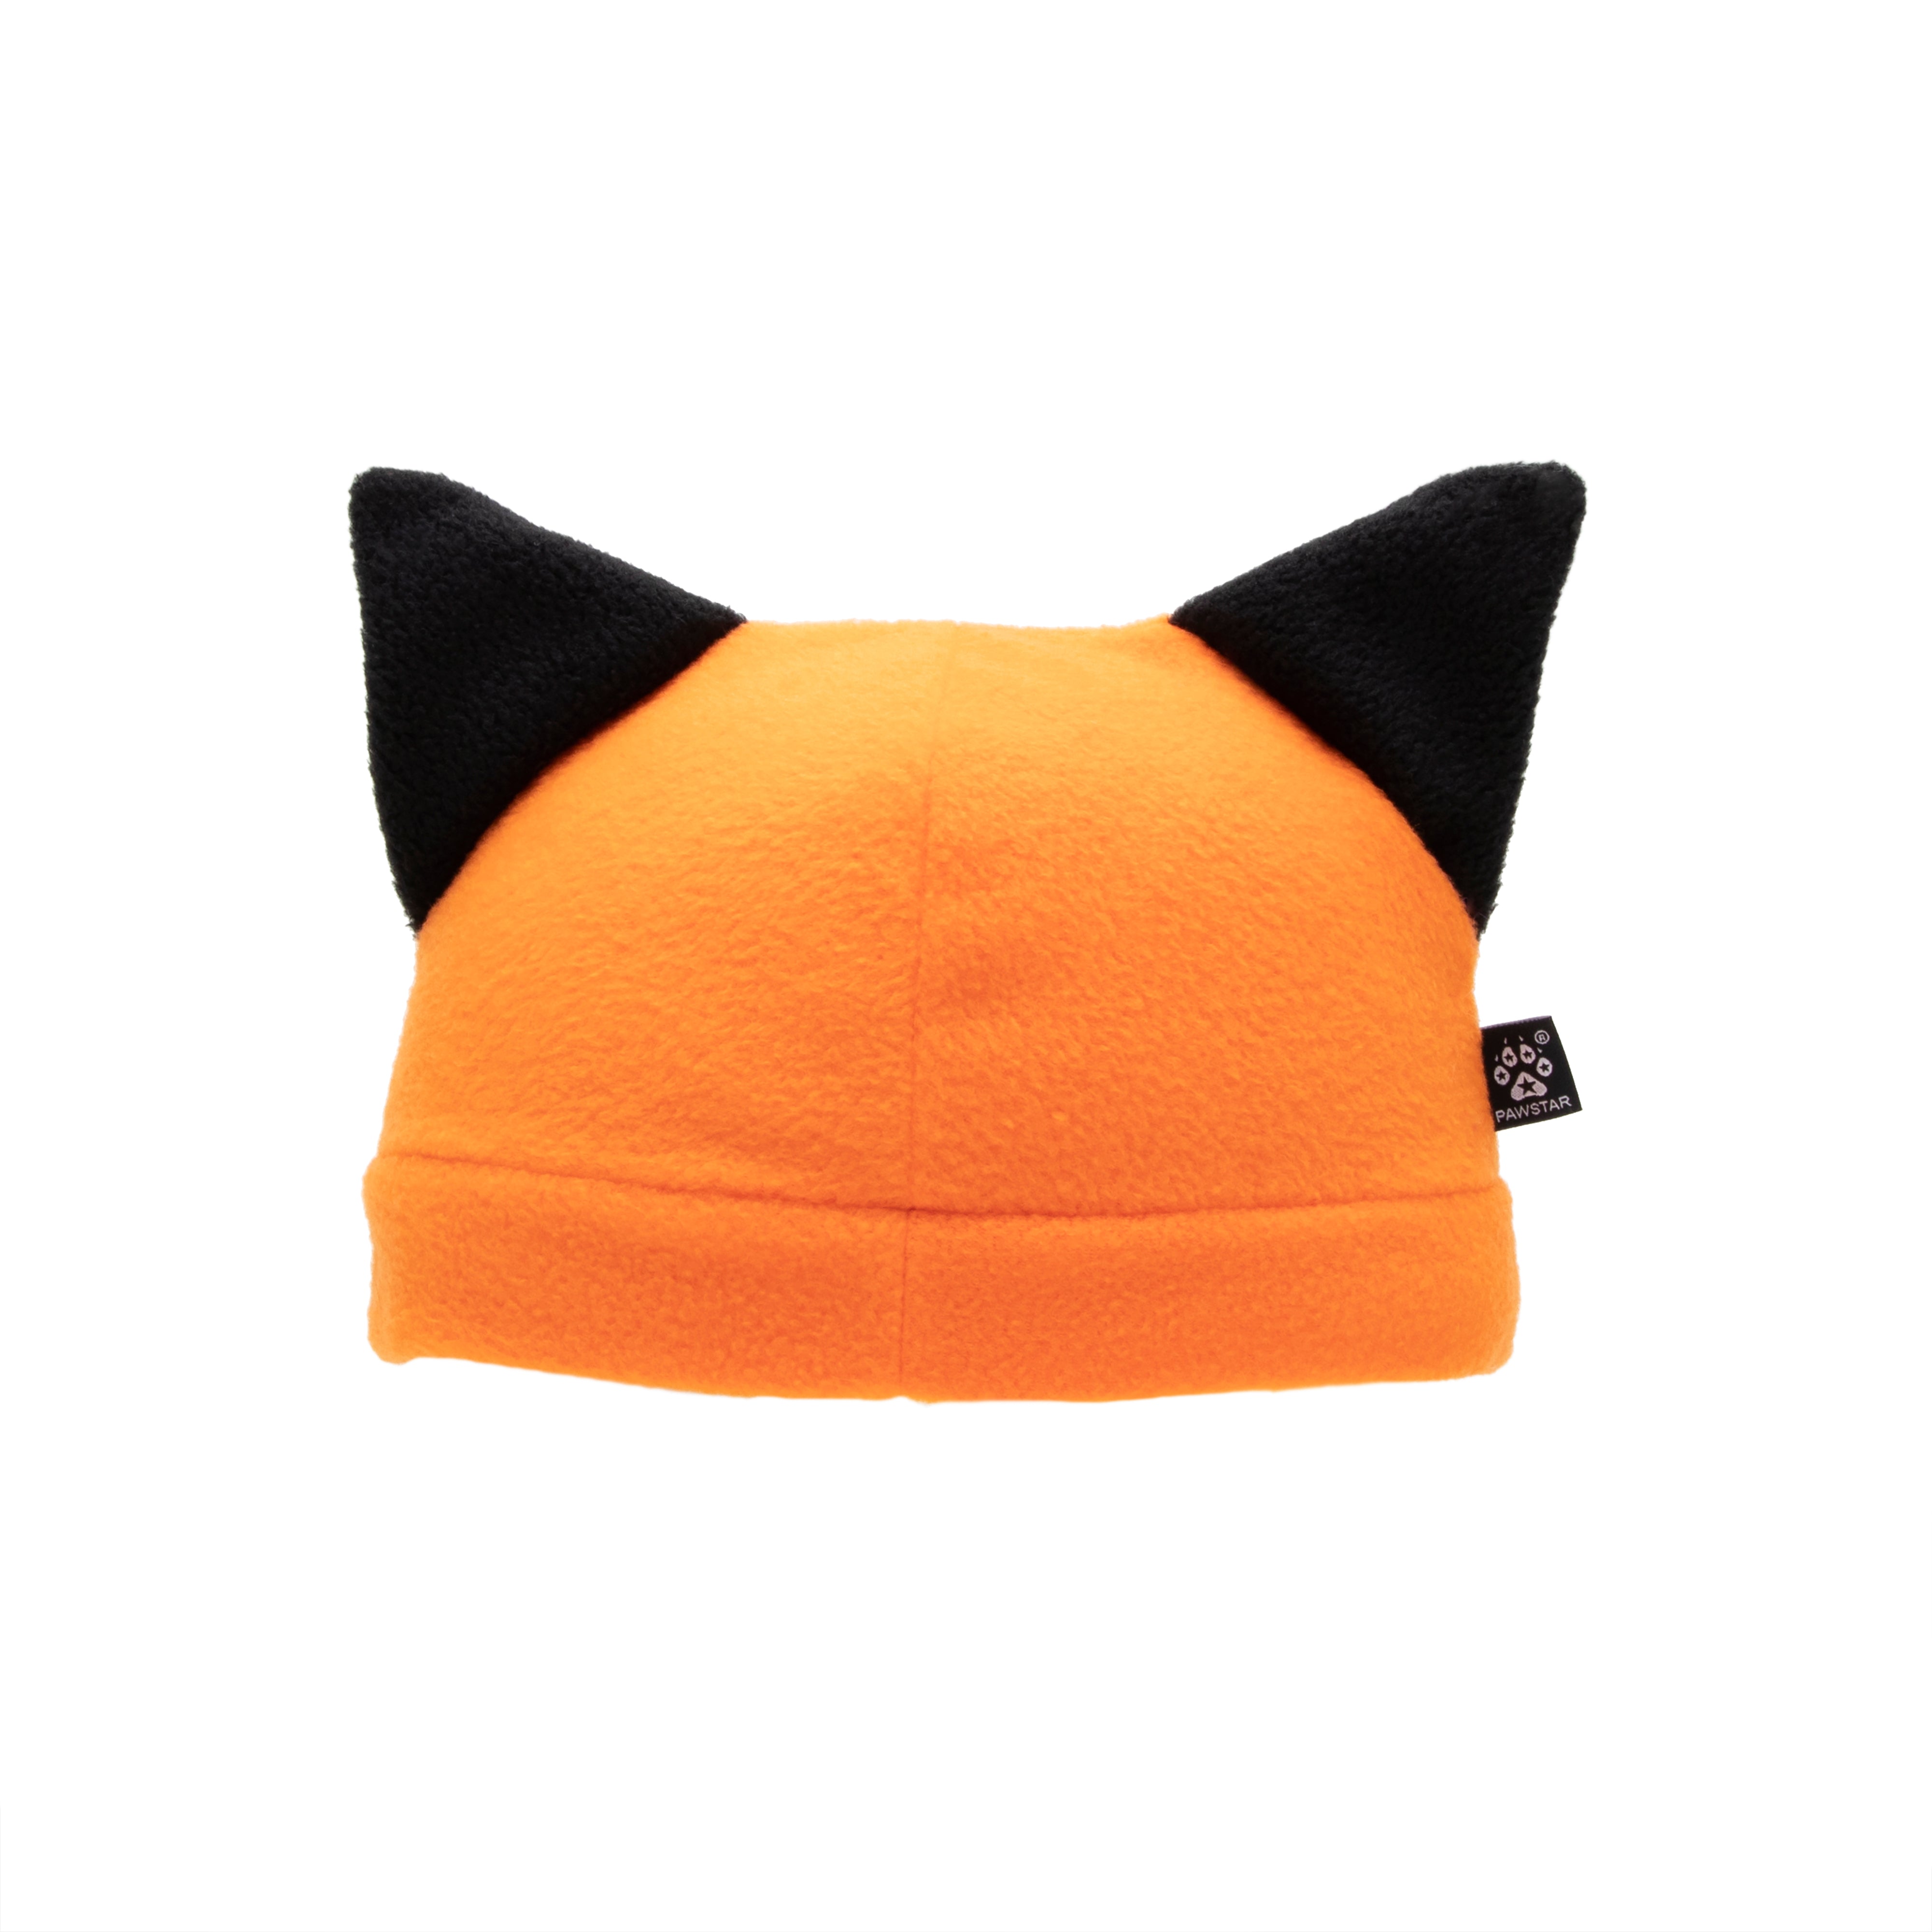 Pawstar Chuffins the Happy Fox Hat for cosplay halloween costume fursuit furry